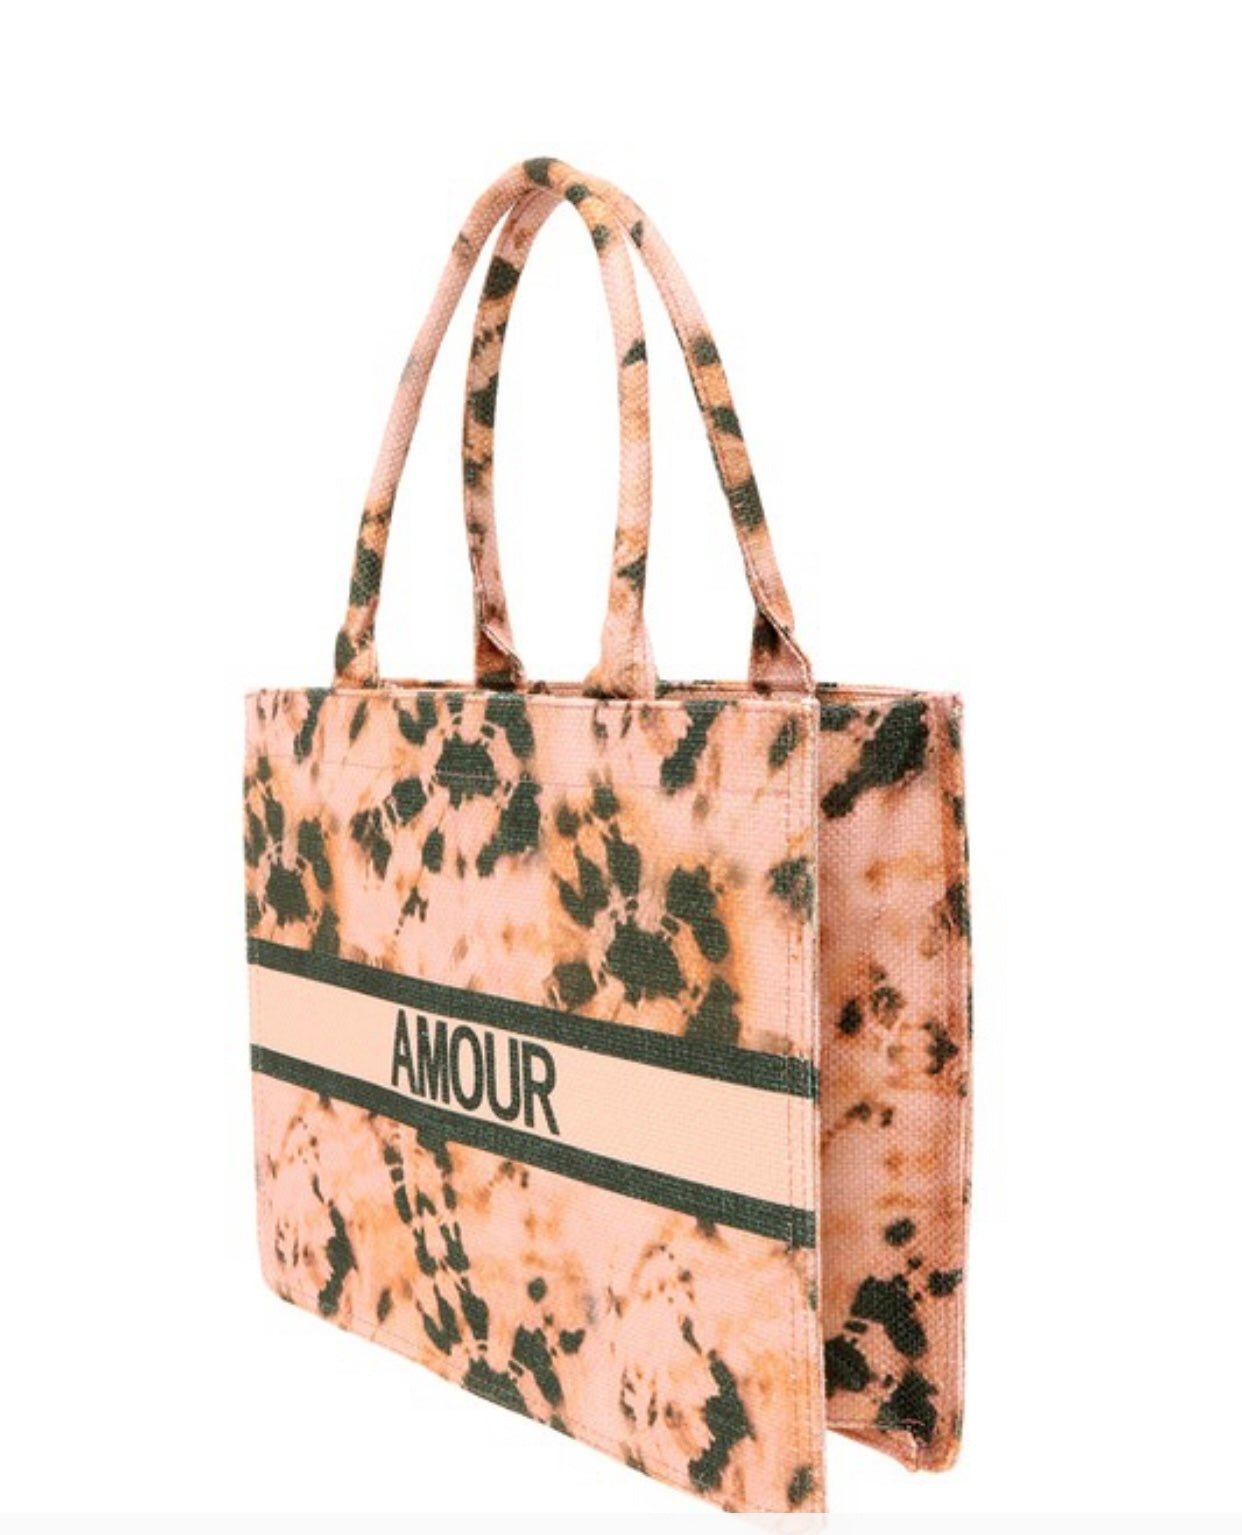 "Amour" Tote Bag